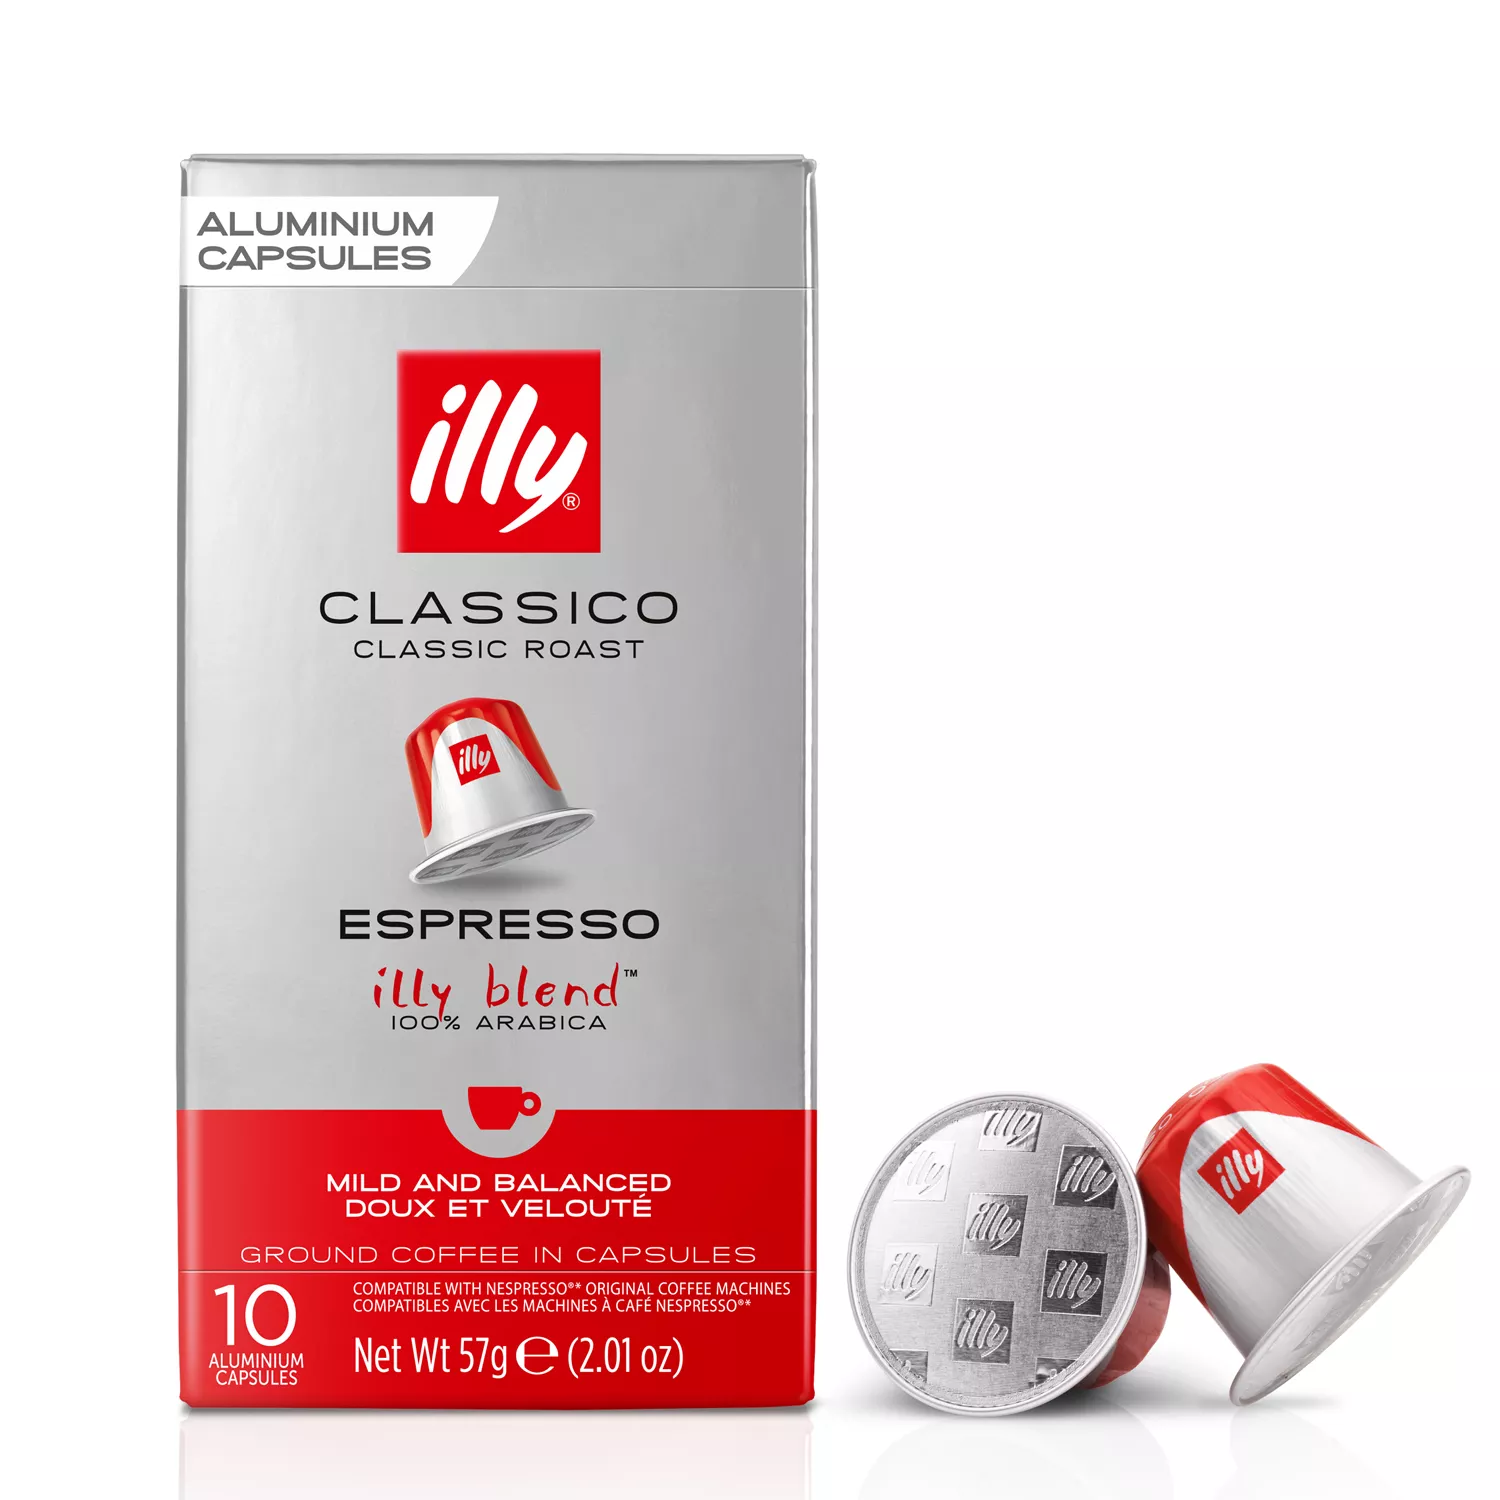 Coffee Gifts, Boxed Git Sets, Tea and Accessories - illy Shop